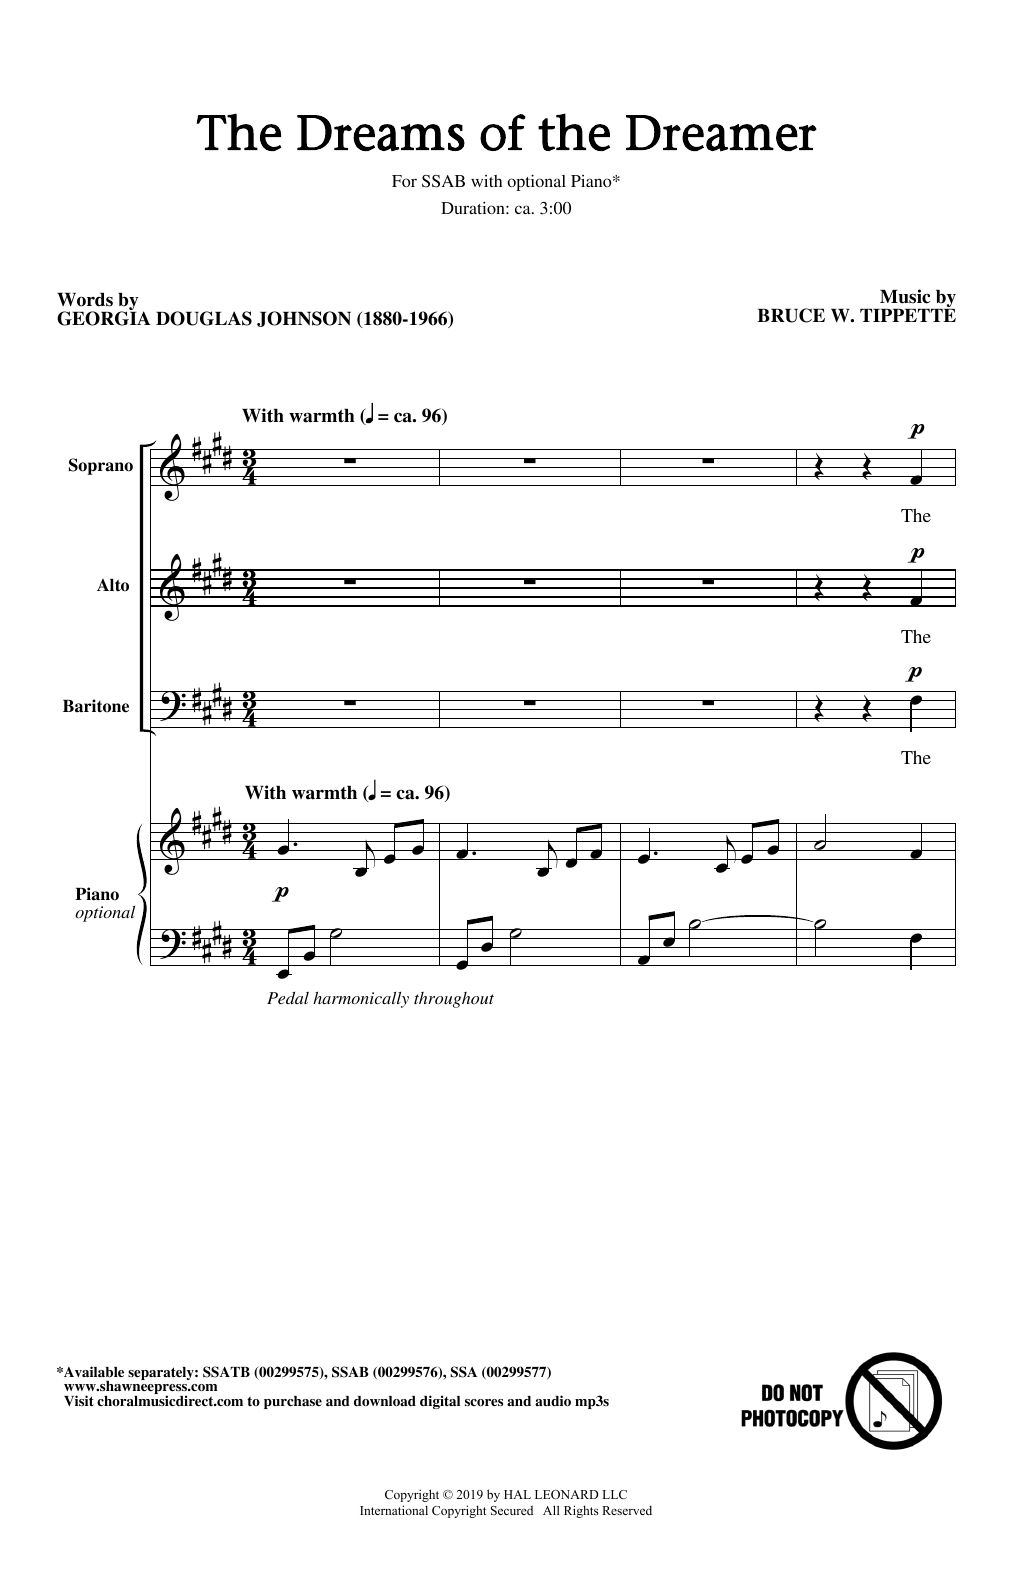 Download Georgia Douglas Johnson and Bruce W. The Dreams Of The Dreamer Sheet Music